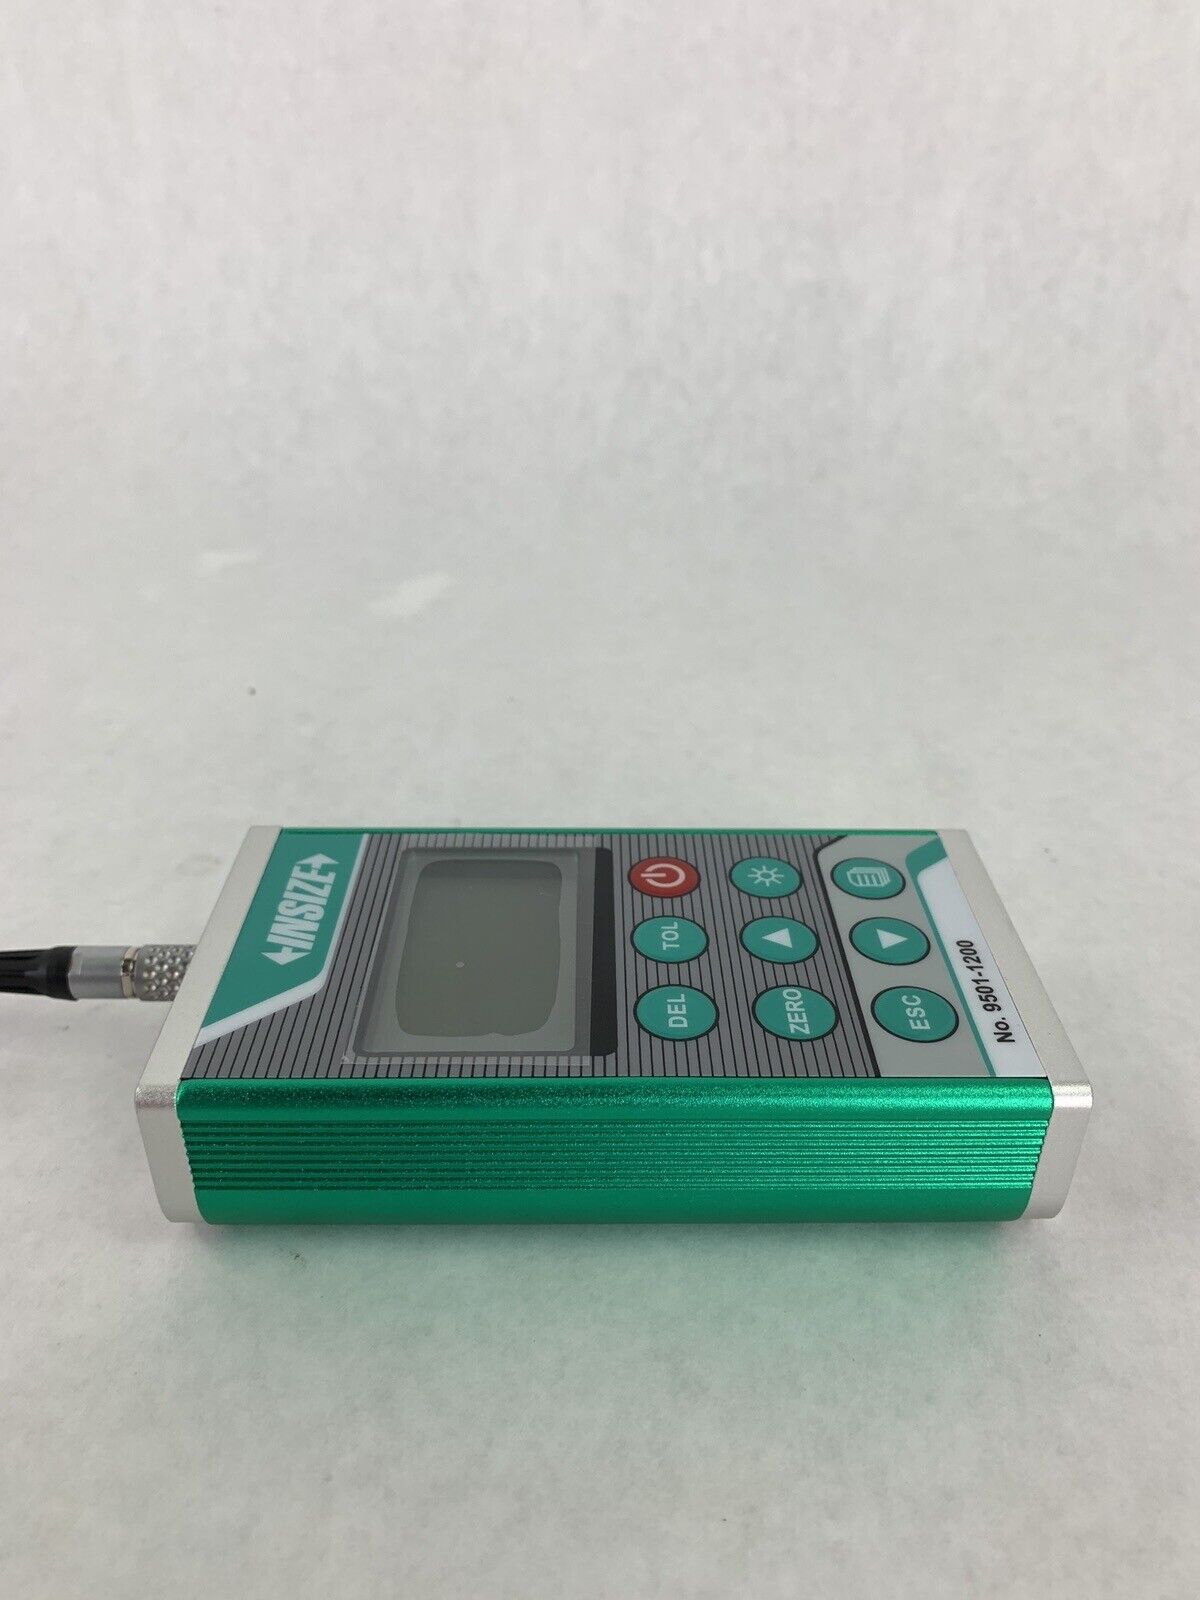 Insize 9501-1200 Coating Thickness Gage Power Tested